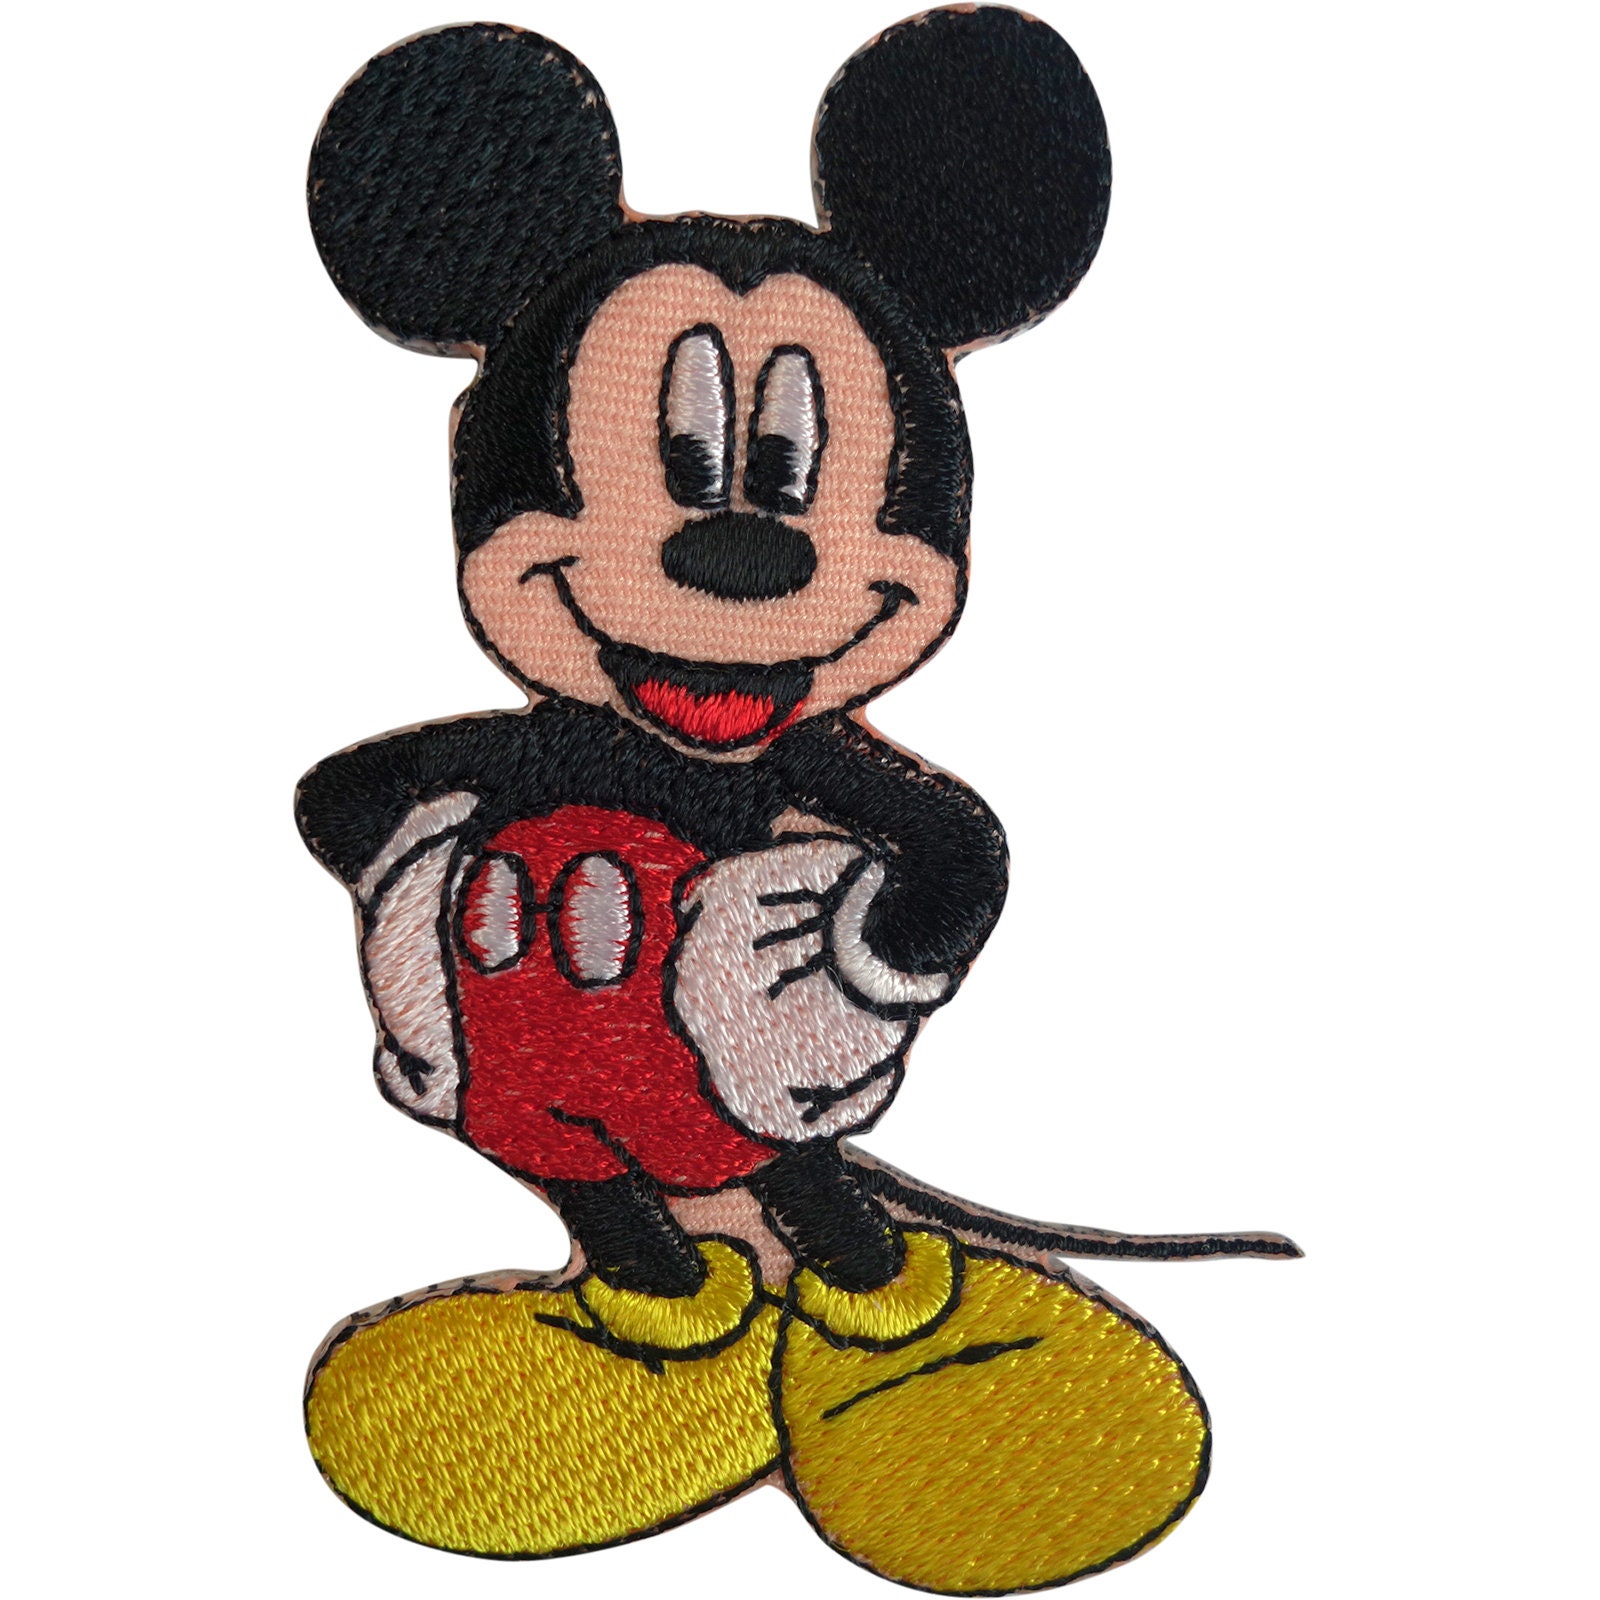 Disney Mickey Mouse Patch Sweatshirt – The Stand Alone